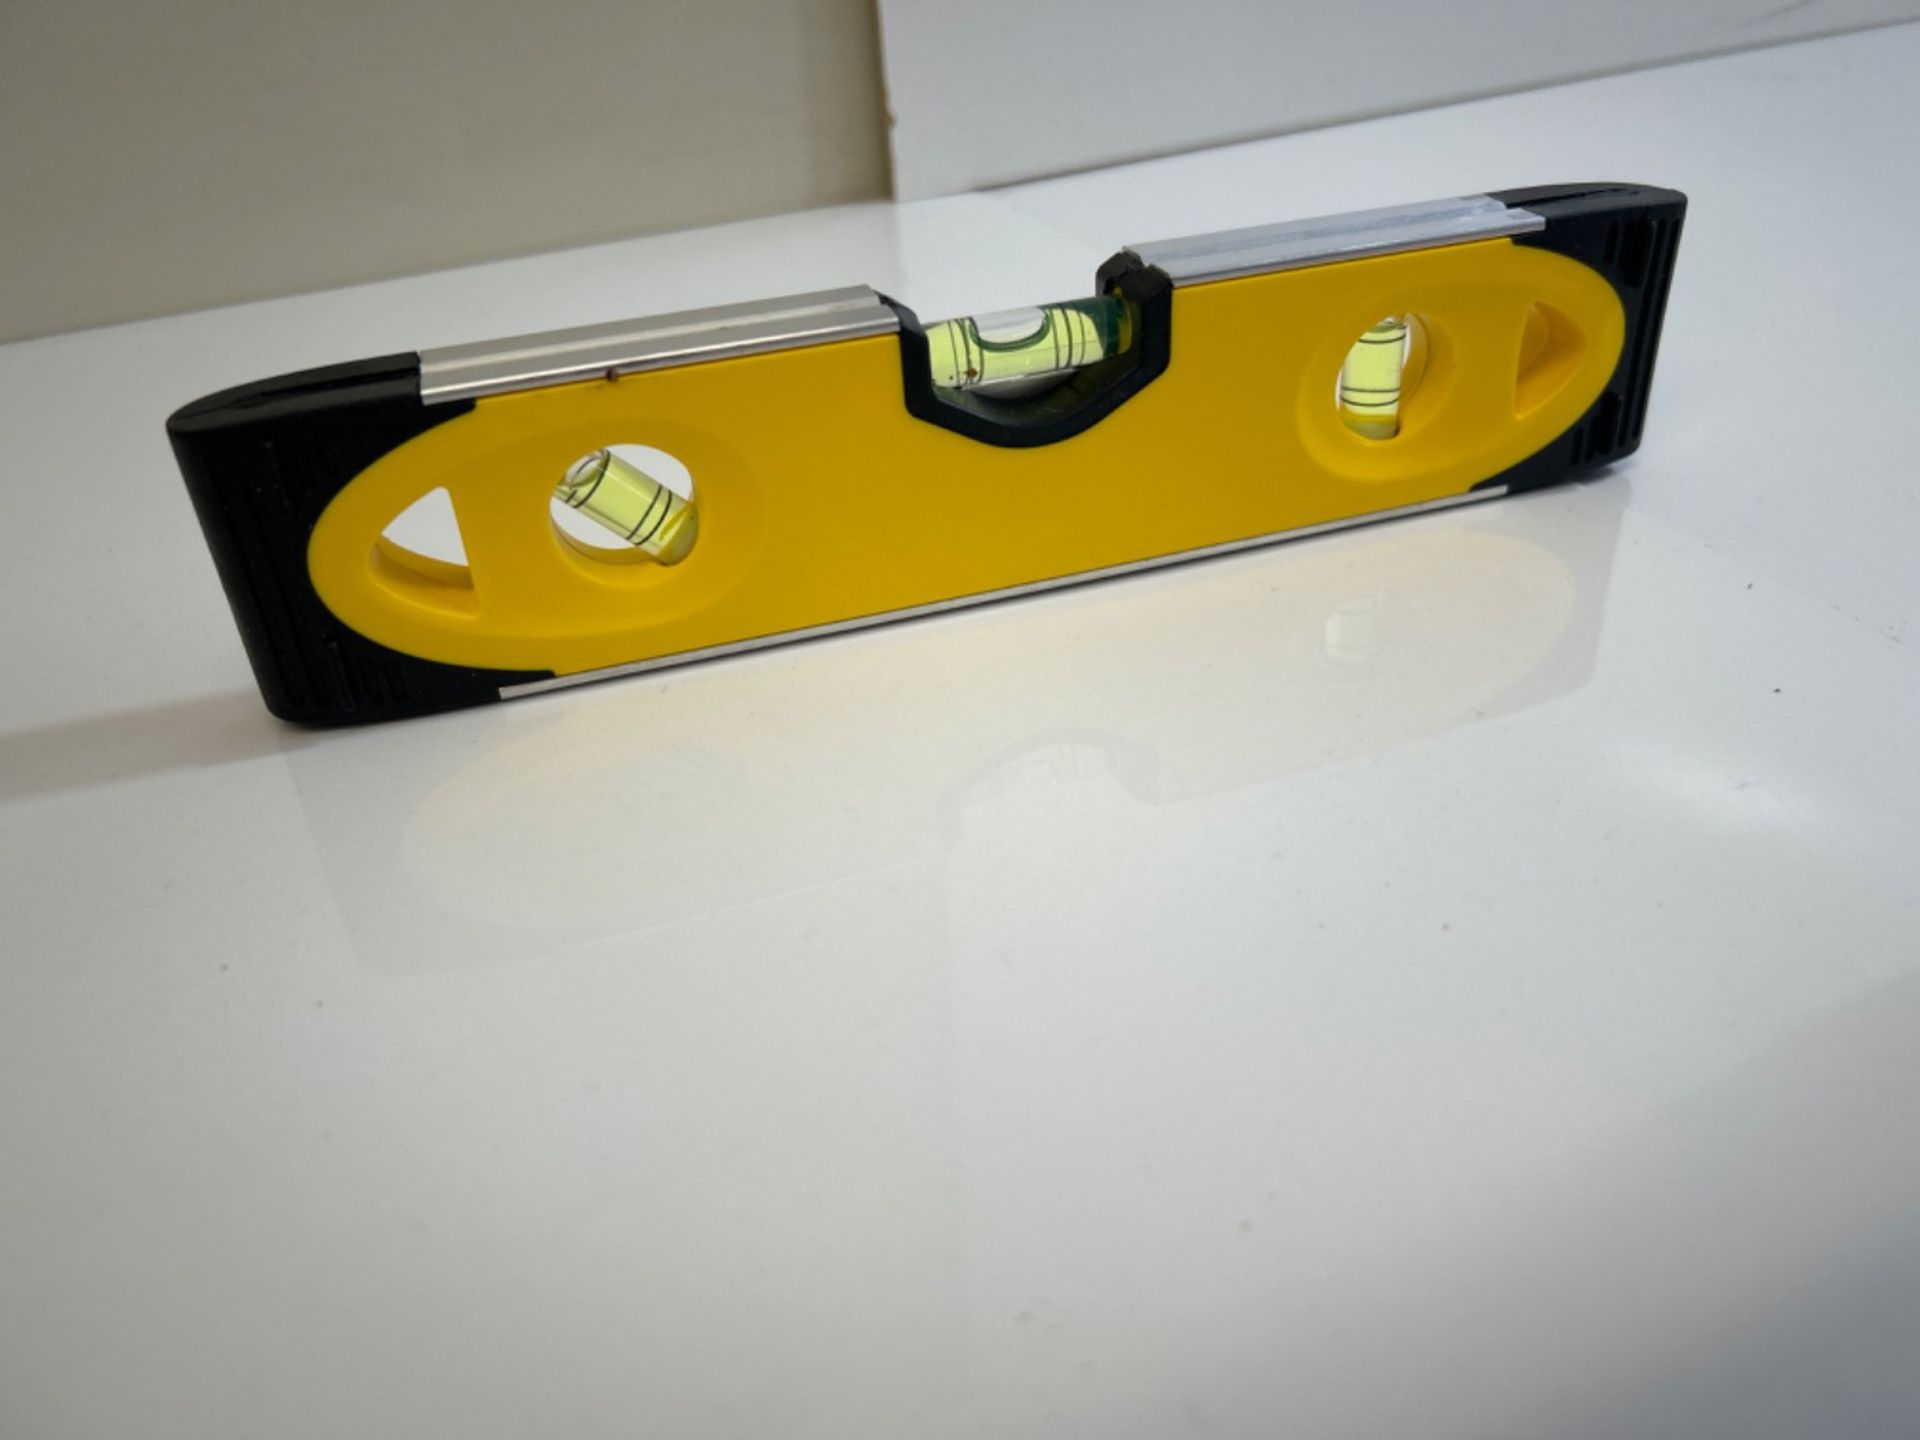 Stanley Shock Proof Torpedo Level 230 mm/9 Inch 0-43-511 - Image 3 of 3